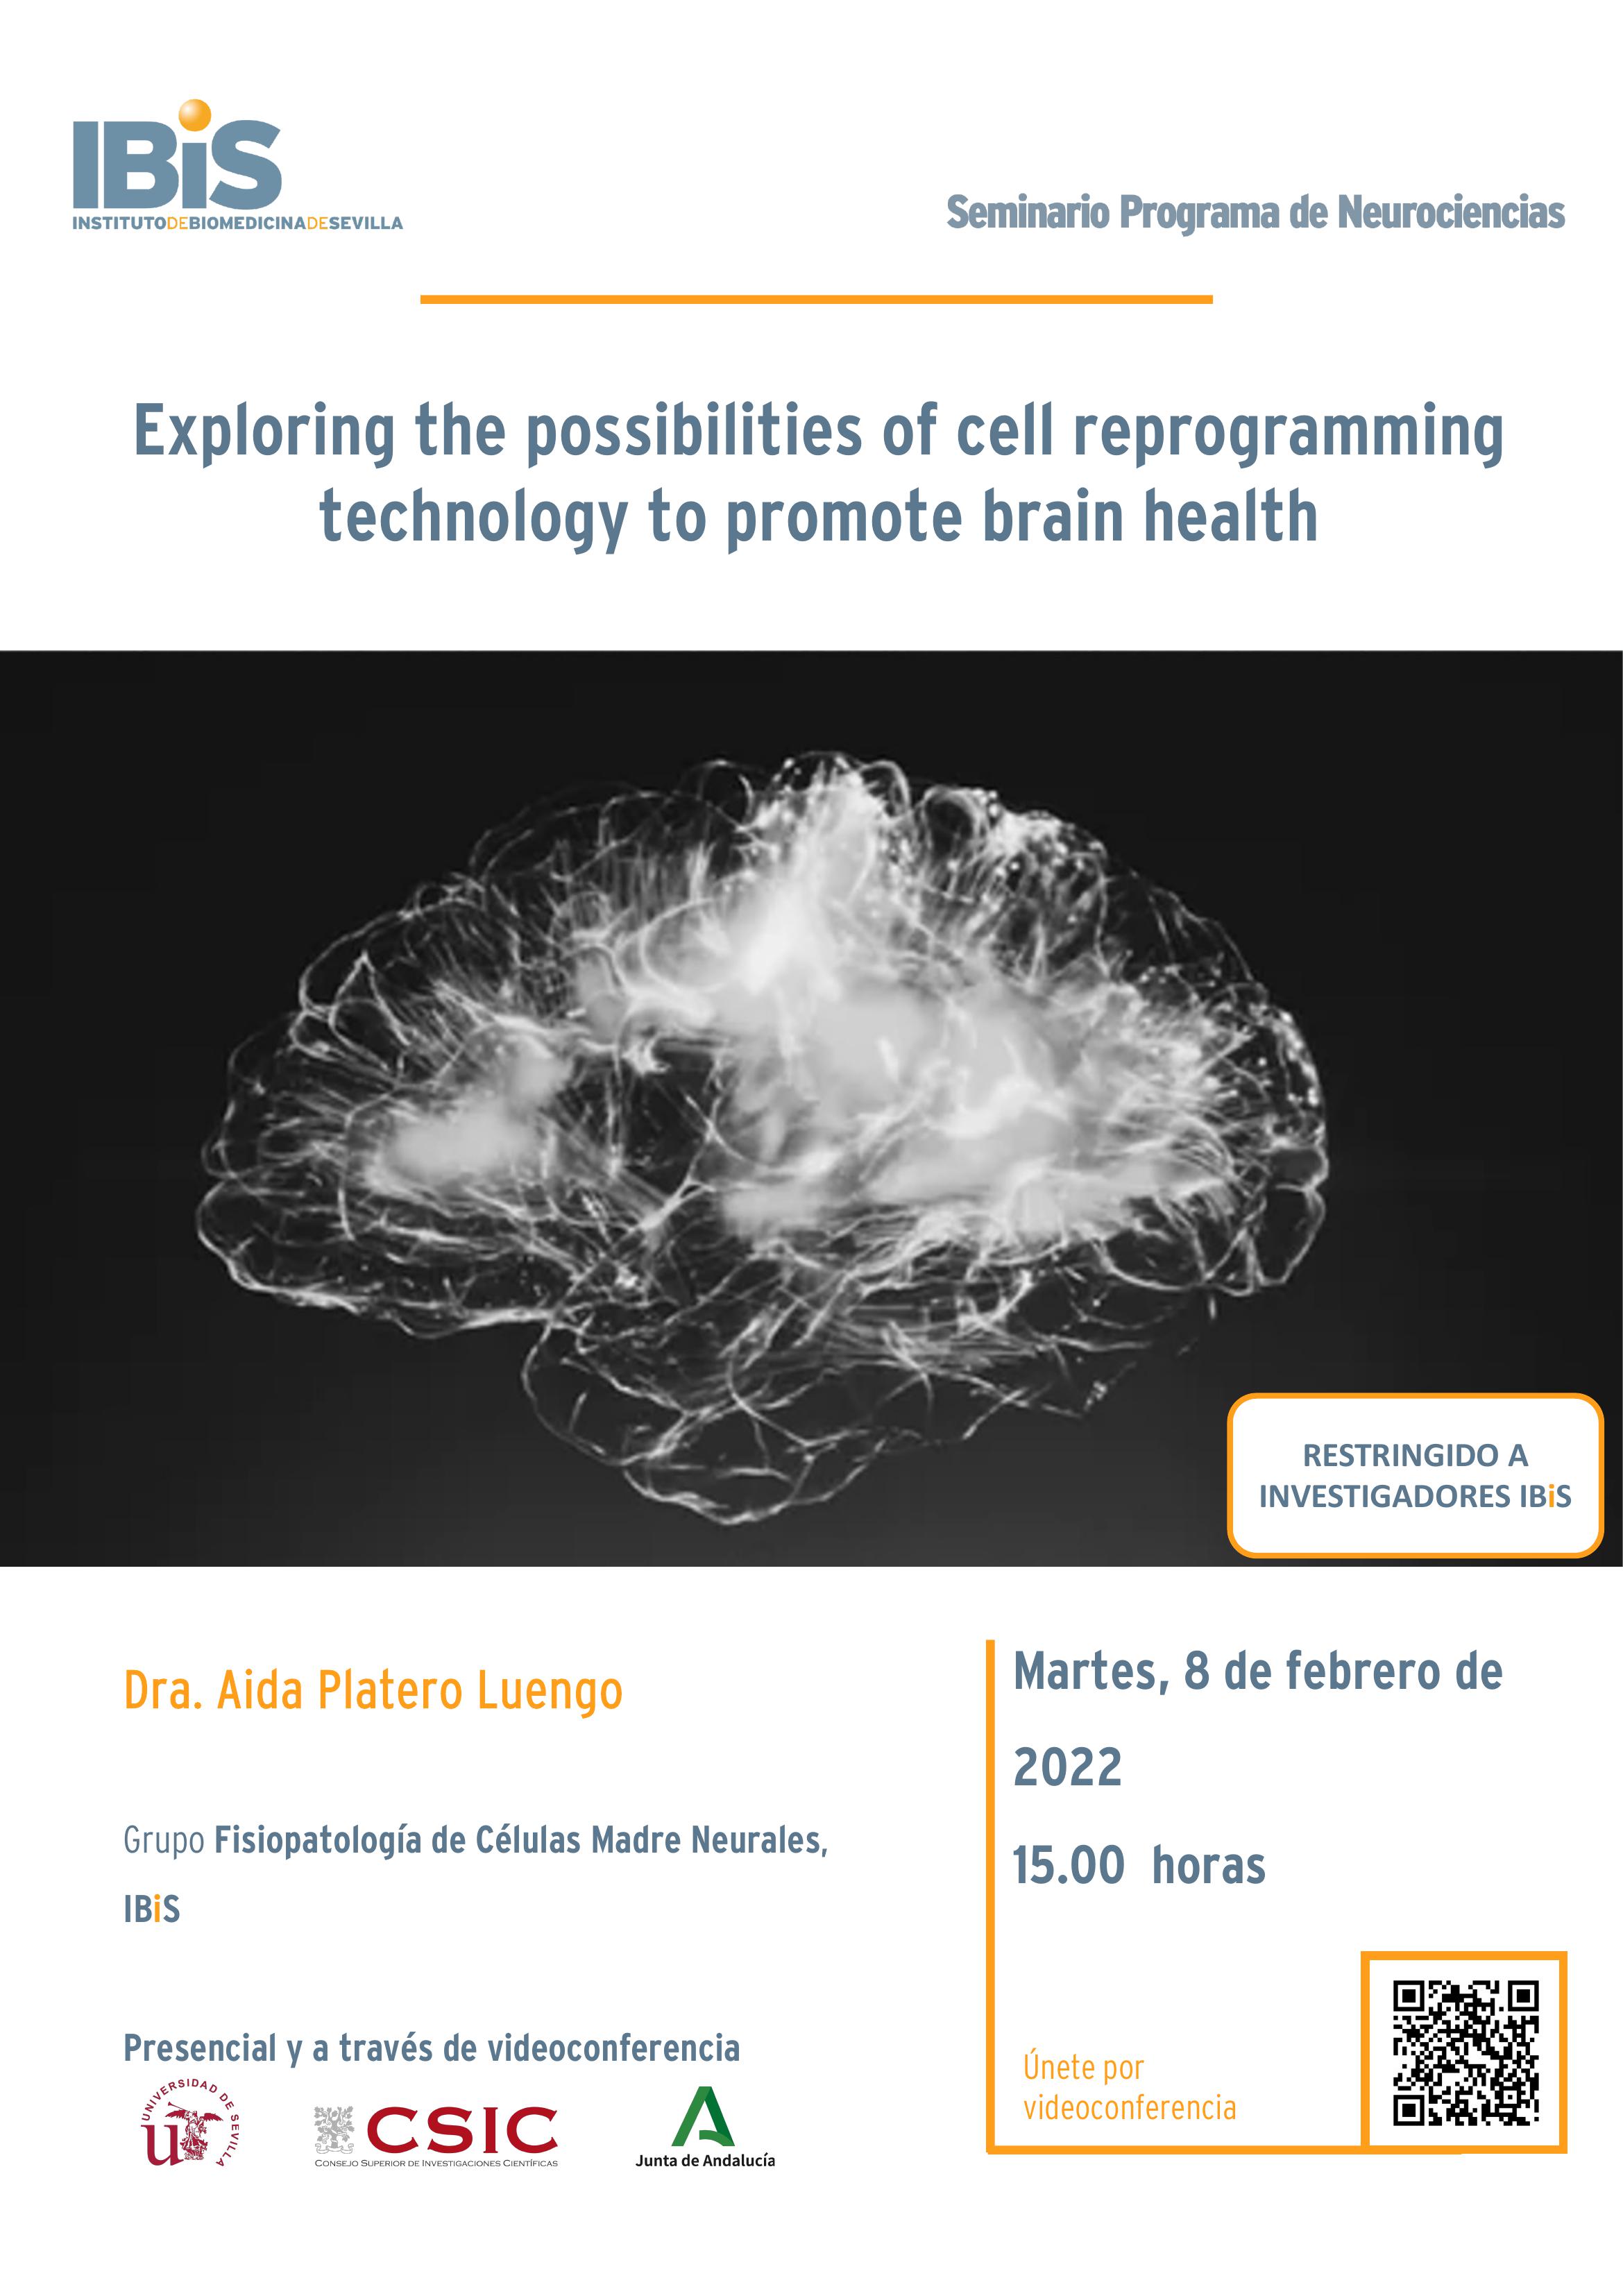 Poster: Exploring the possibilities of cell reprogramming technology to promote brain health